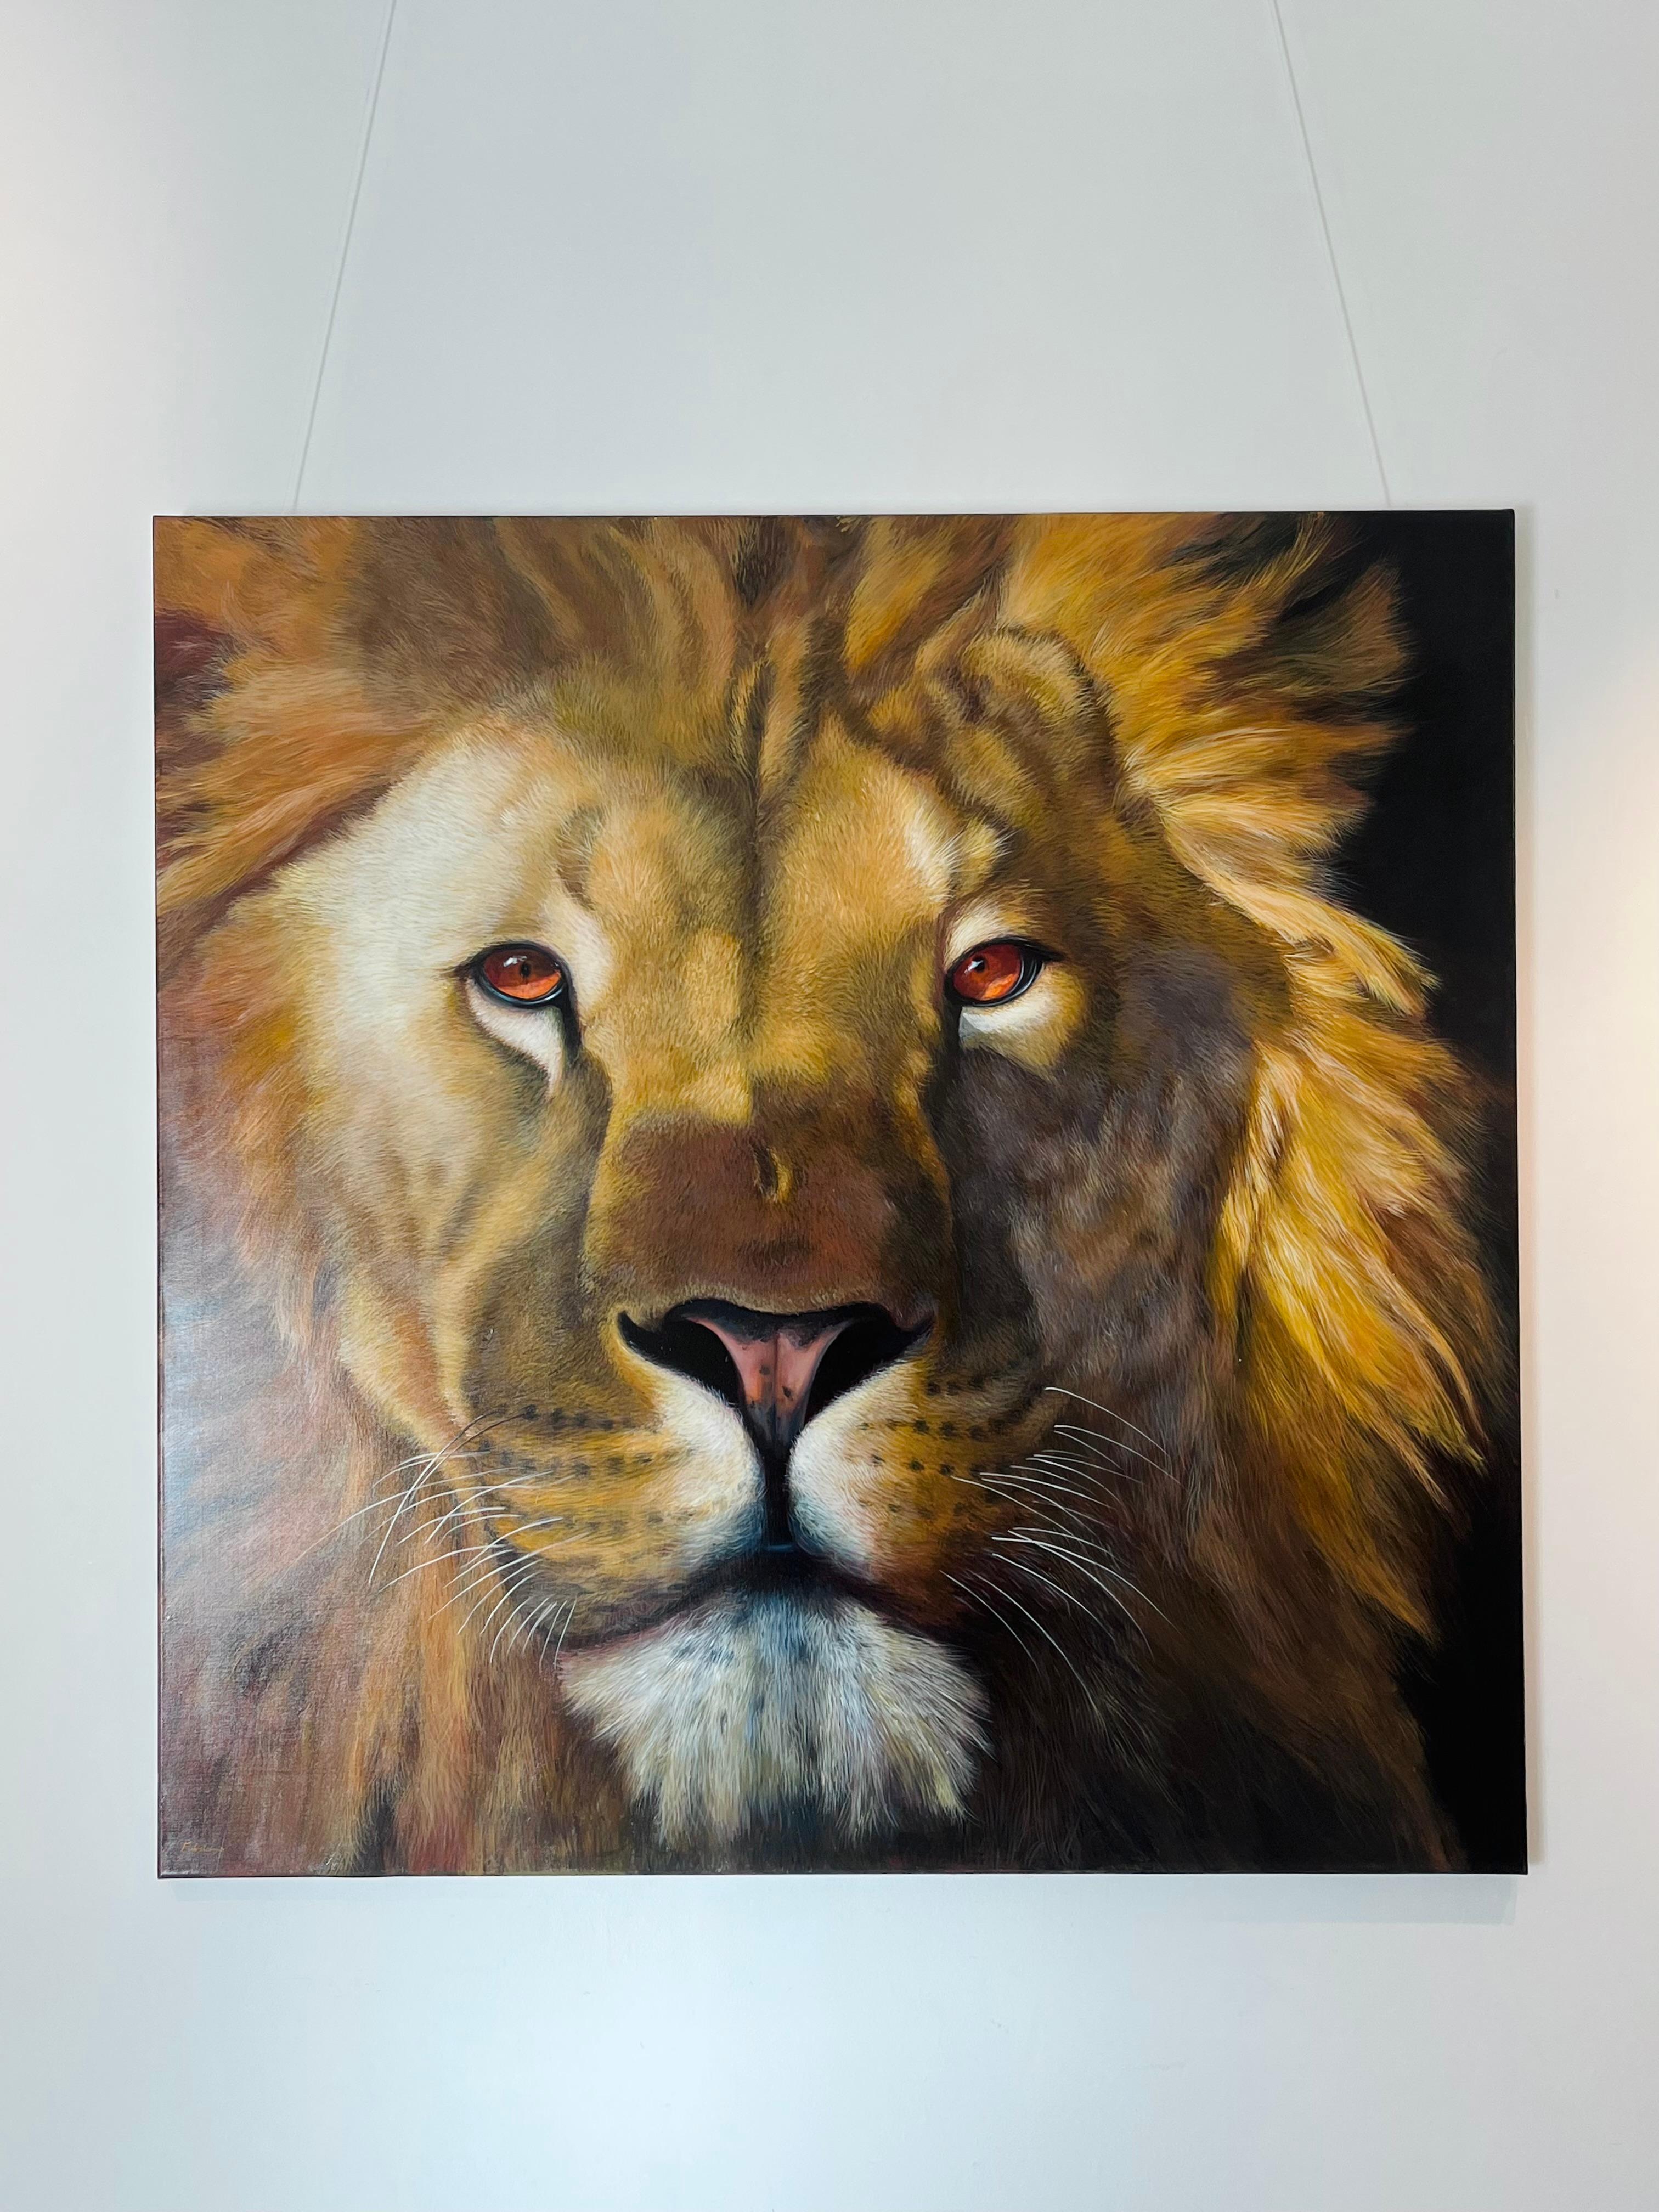 Power Lion-original modern photo realism wildlife oil painting-contemporary Art - Painting by Fabriano